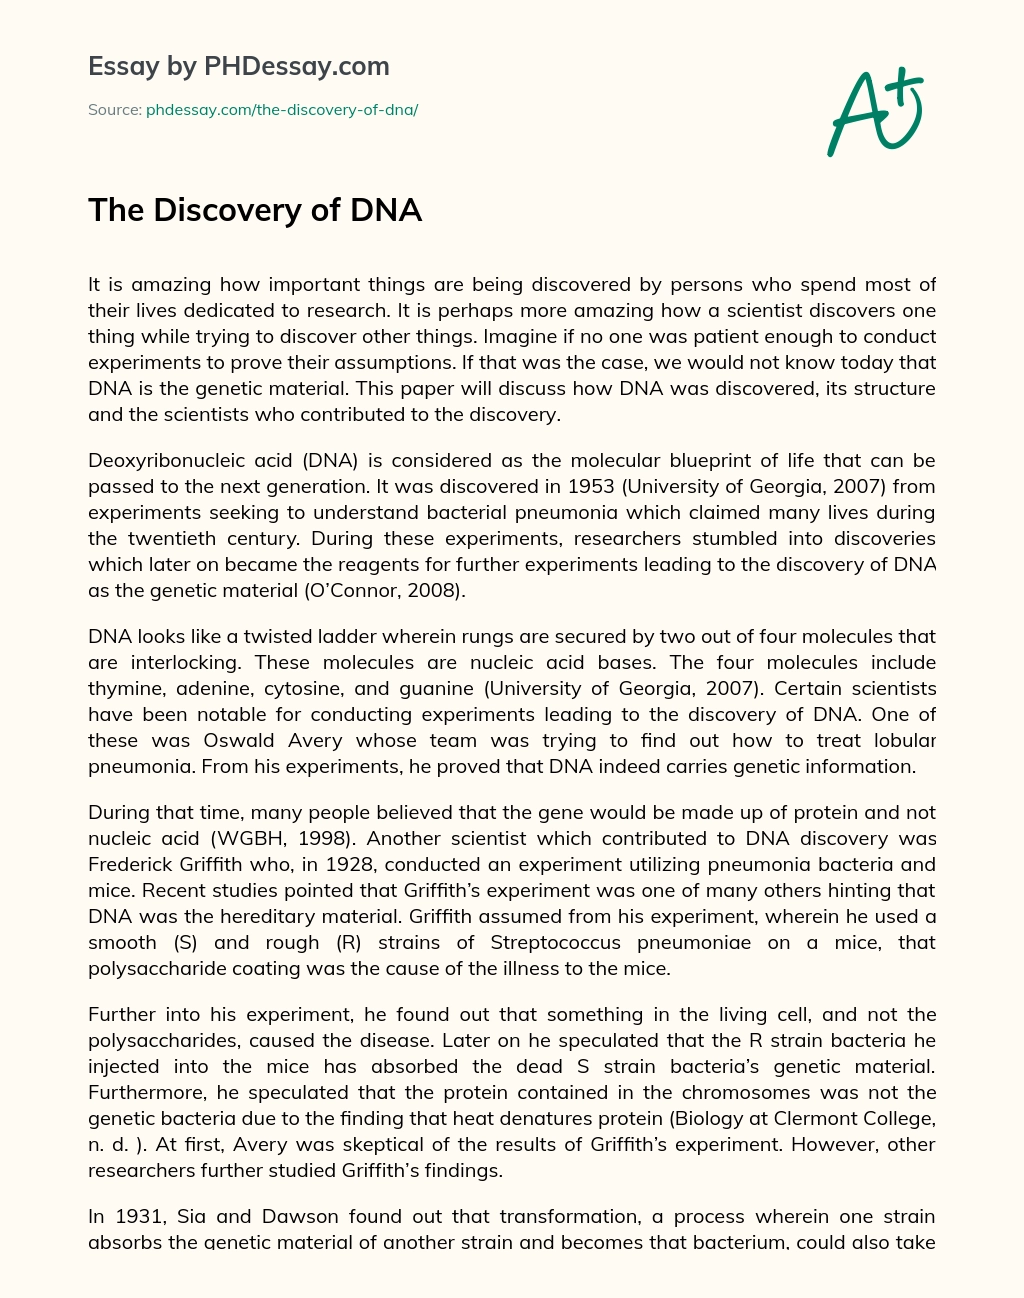 The Discovery of DNA essay